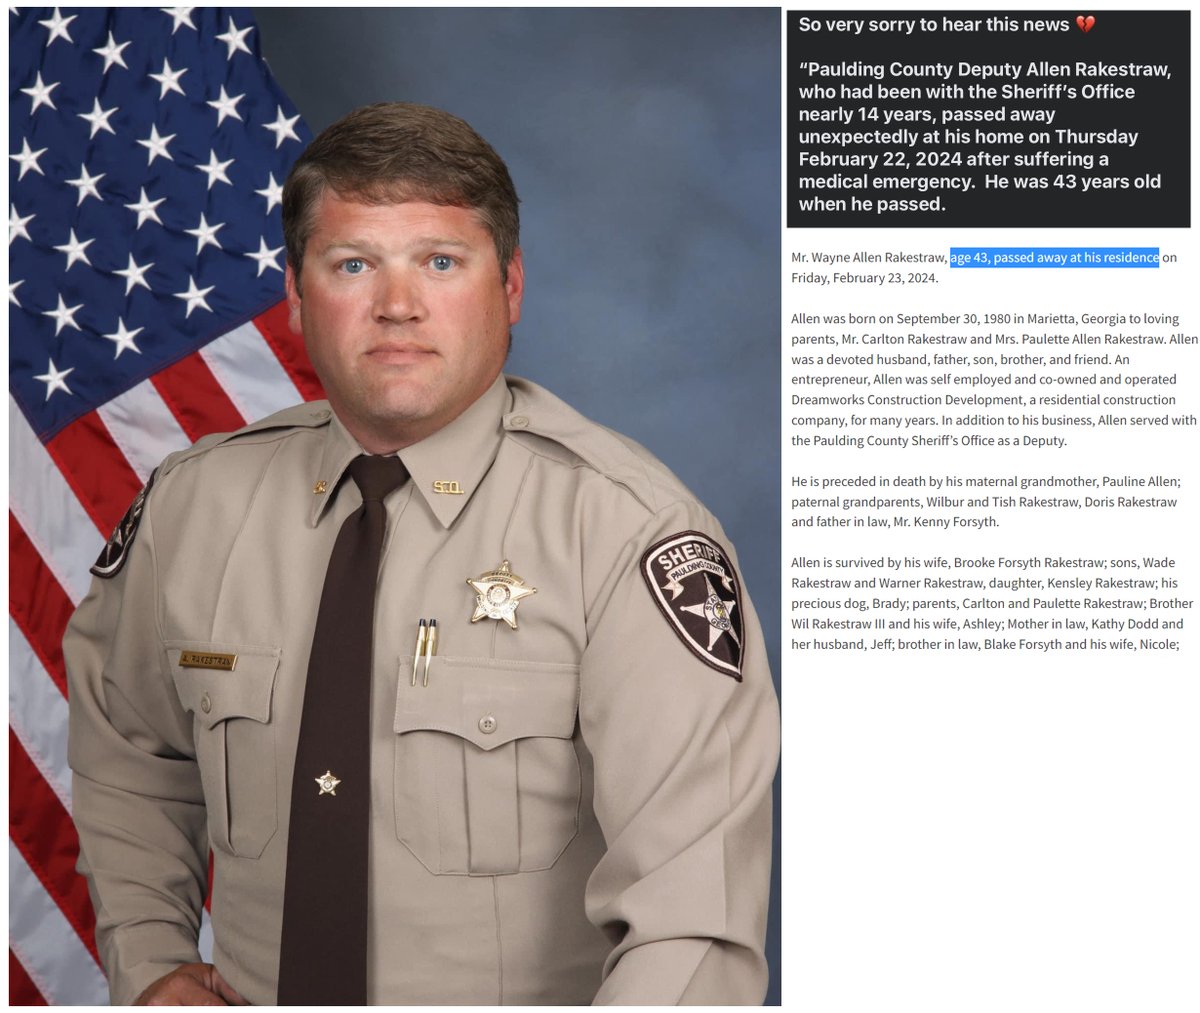 Dallas, GA - 43 year old Paulding County Sheriff's Deputy Wayne Allen Rakestraw died unexpectedly at his home on Feb.22, 2024, after 'suffering a medical emergency' COVID-19 mRNA Vaccine Mandated sudden deaths are at an all time high and rising #DiedSuddenly